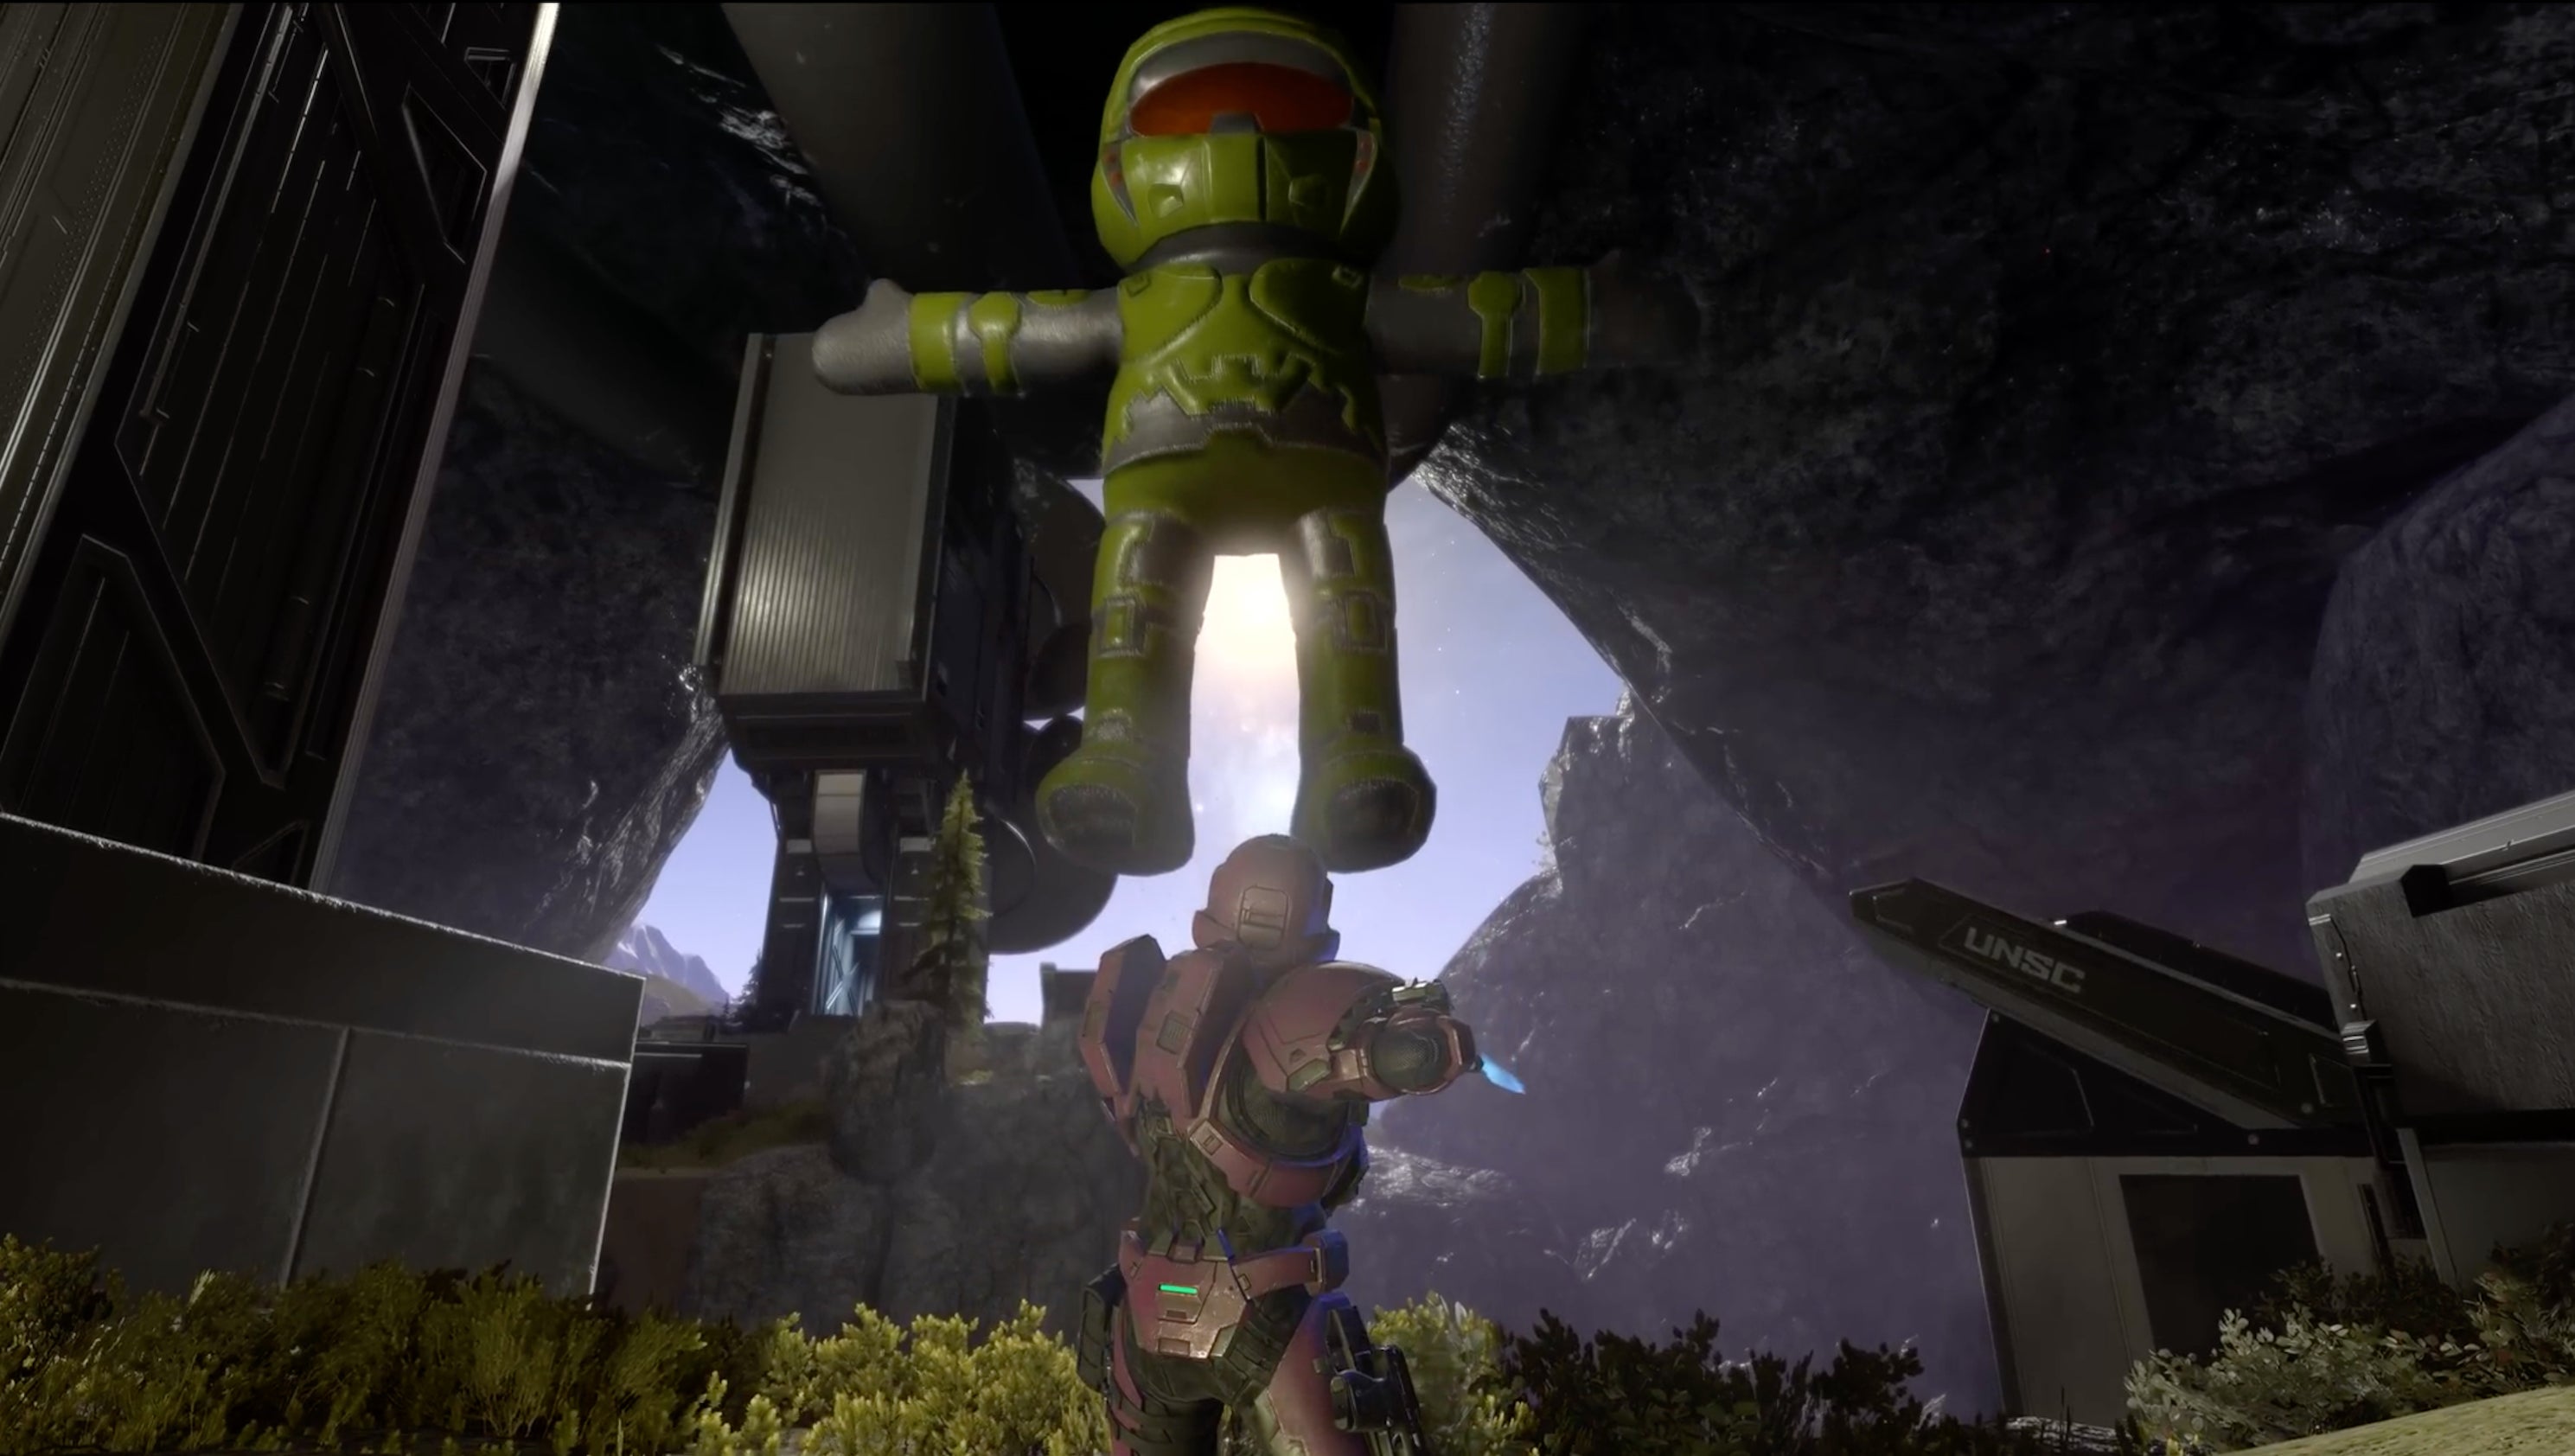 A large toy Master Chief hovers over a spartan.